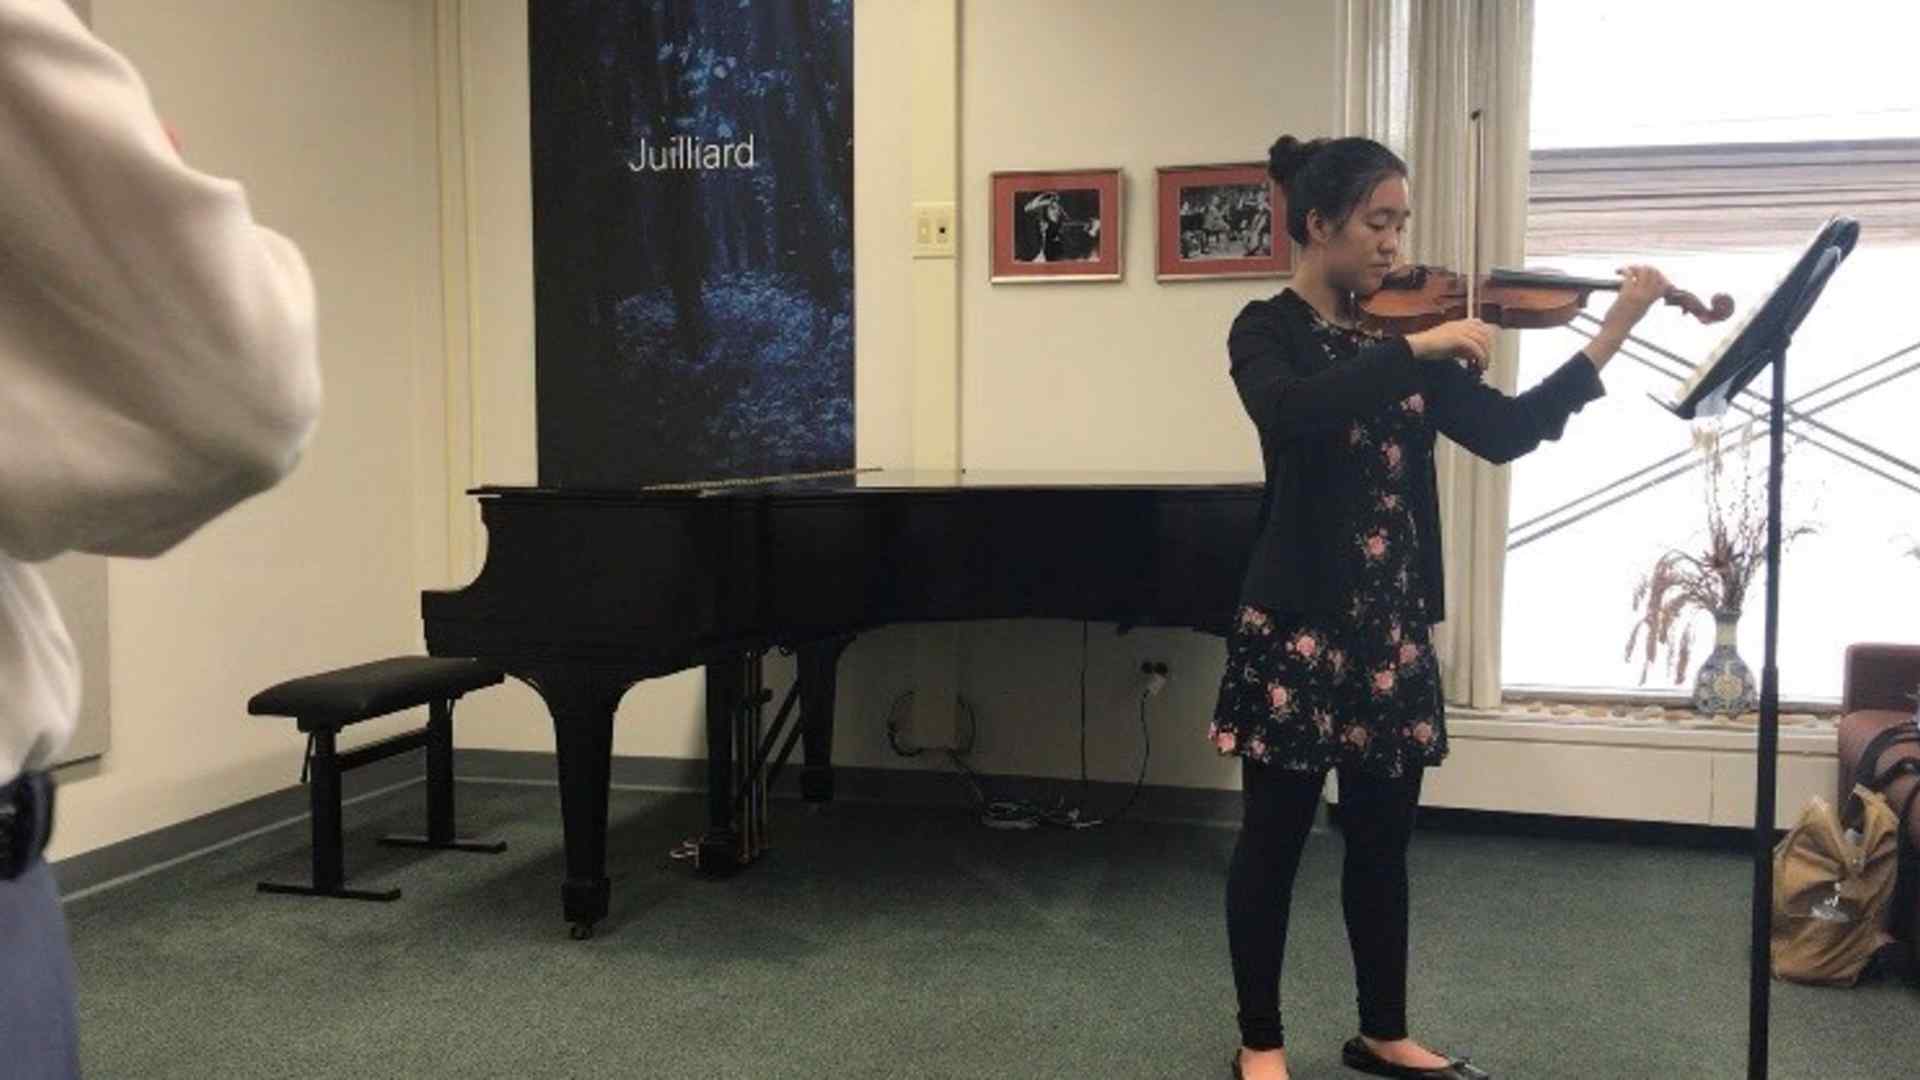 Amy practices violin in a classroom